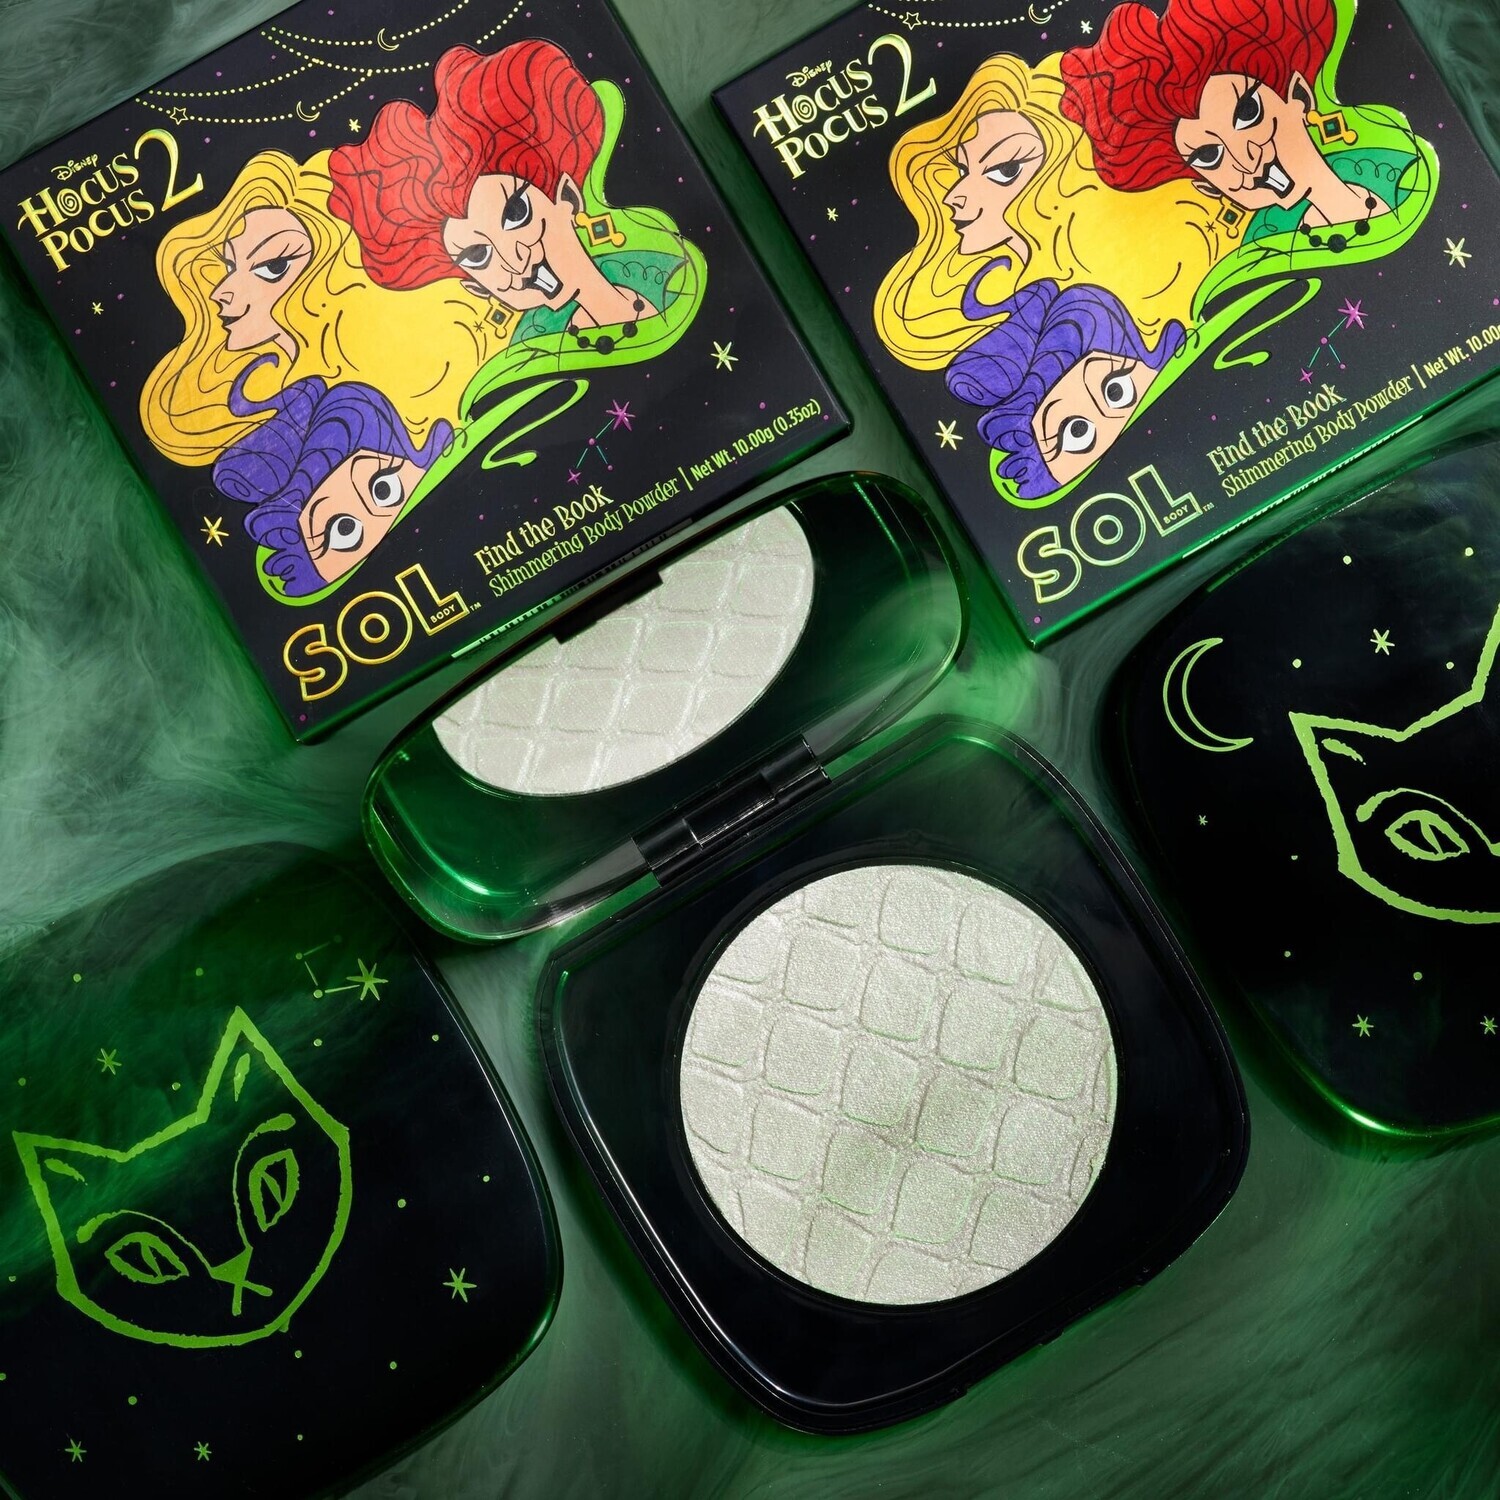 COLOURPOP - Shimmering Body Powder in Find The Book Hocus Pocus 2 Collection